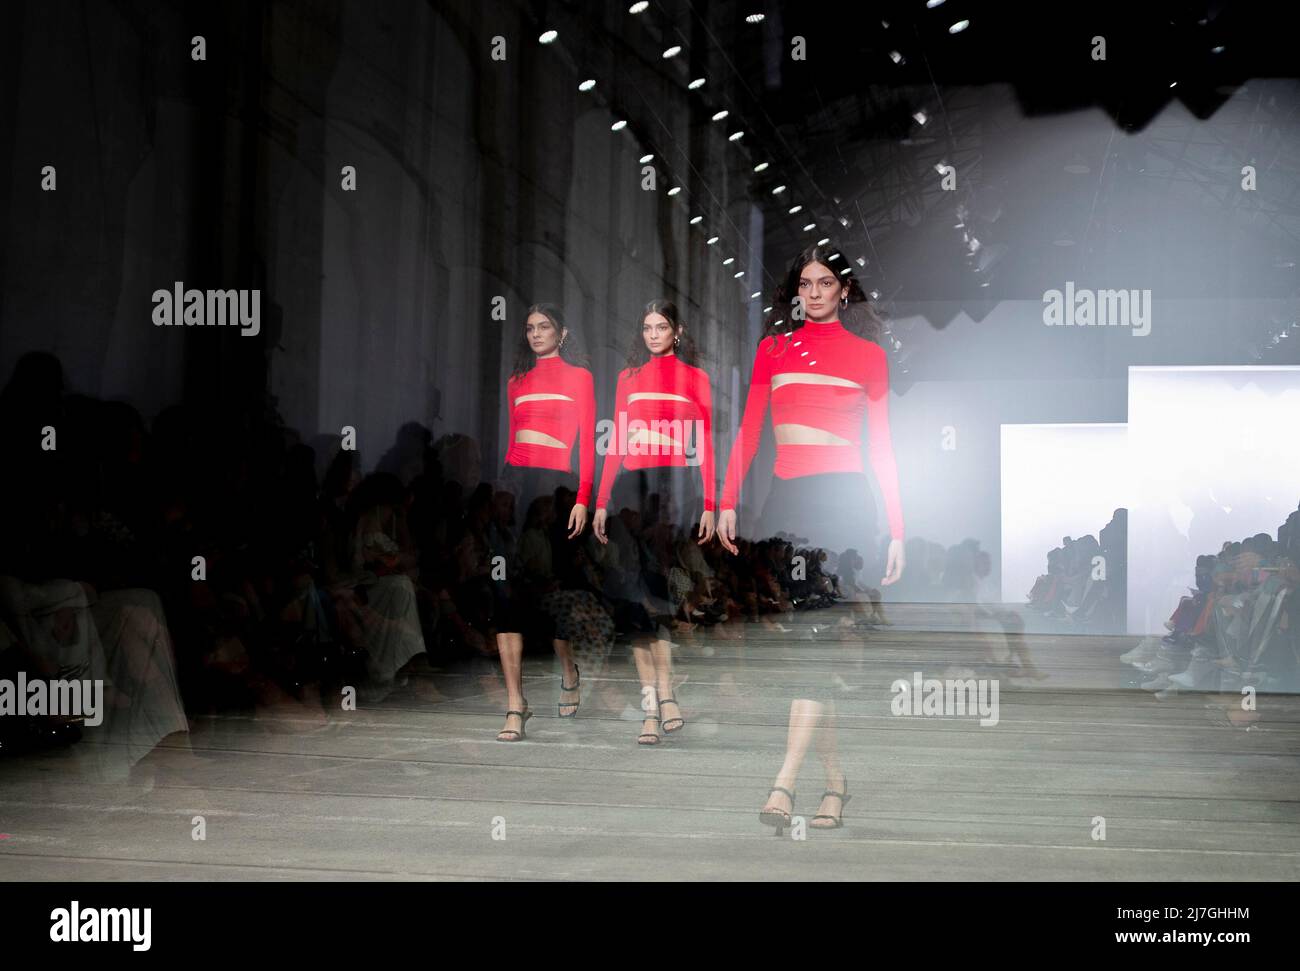 Sydney, Australia. 9th May, 2022. Multiple exposure photo shows a model walking on catwalk during the Afterpay Australian Fashion Week (AAFW) in Sydney, Australia, on May 9, 2022. The AAFW kicked off on Monday with an array of local brands showcasing their resort collections in Sydney. Credit: Bai Xuefei/Xinhua/Alamy Live News Stock Photo